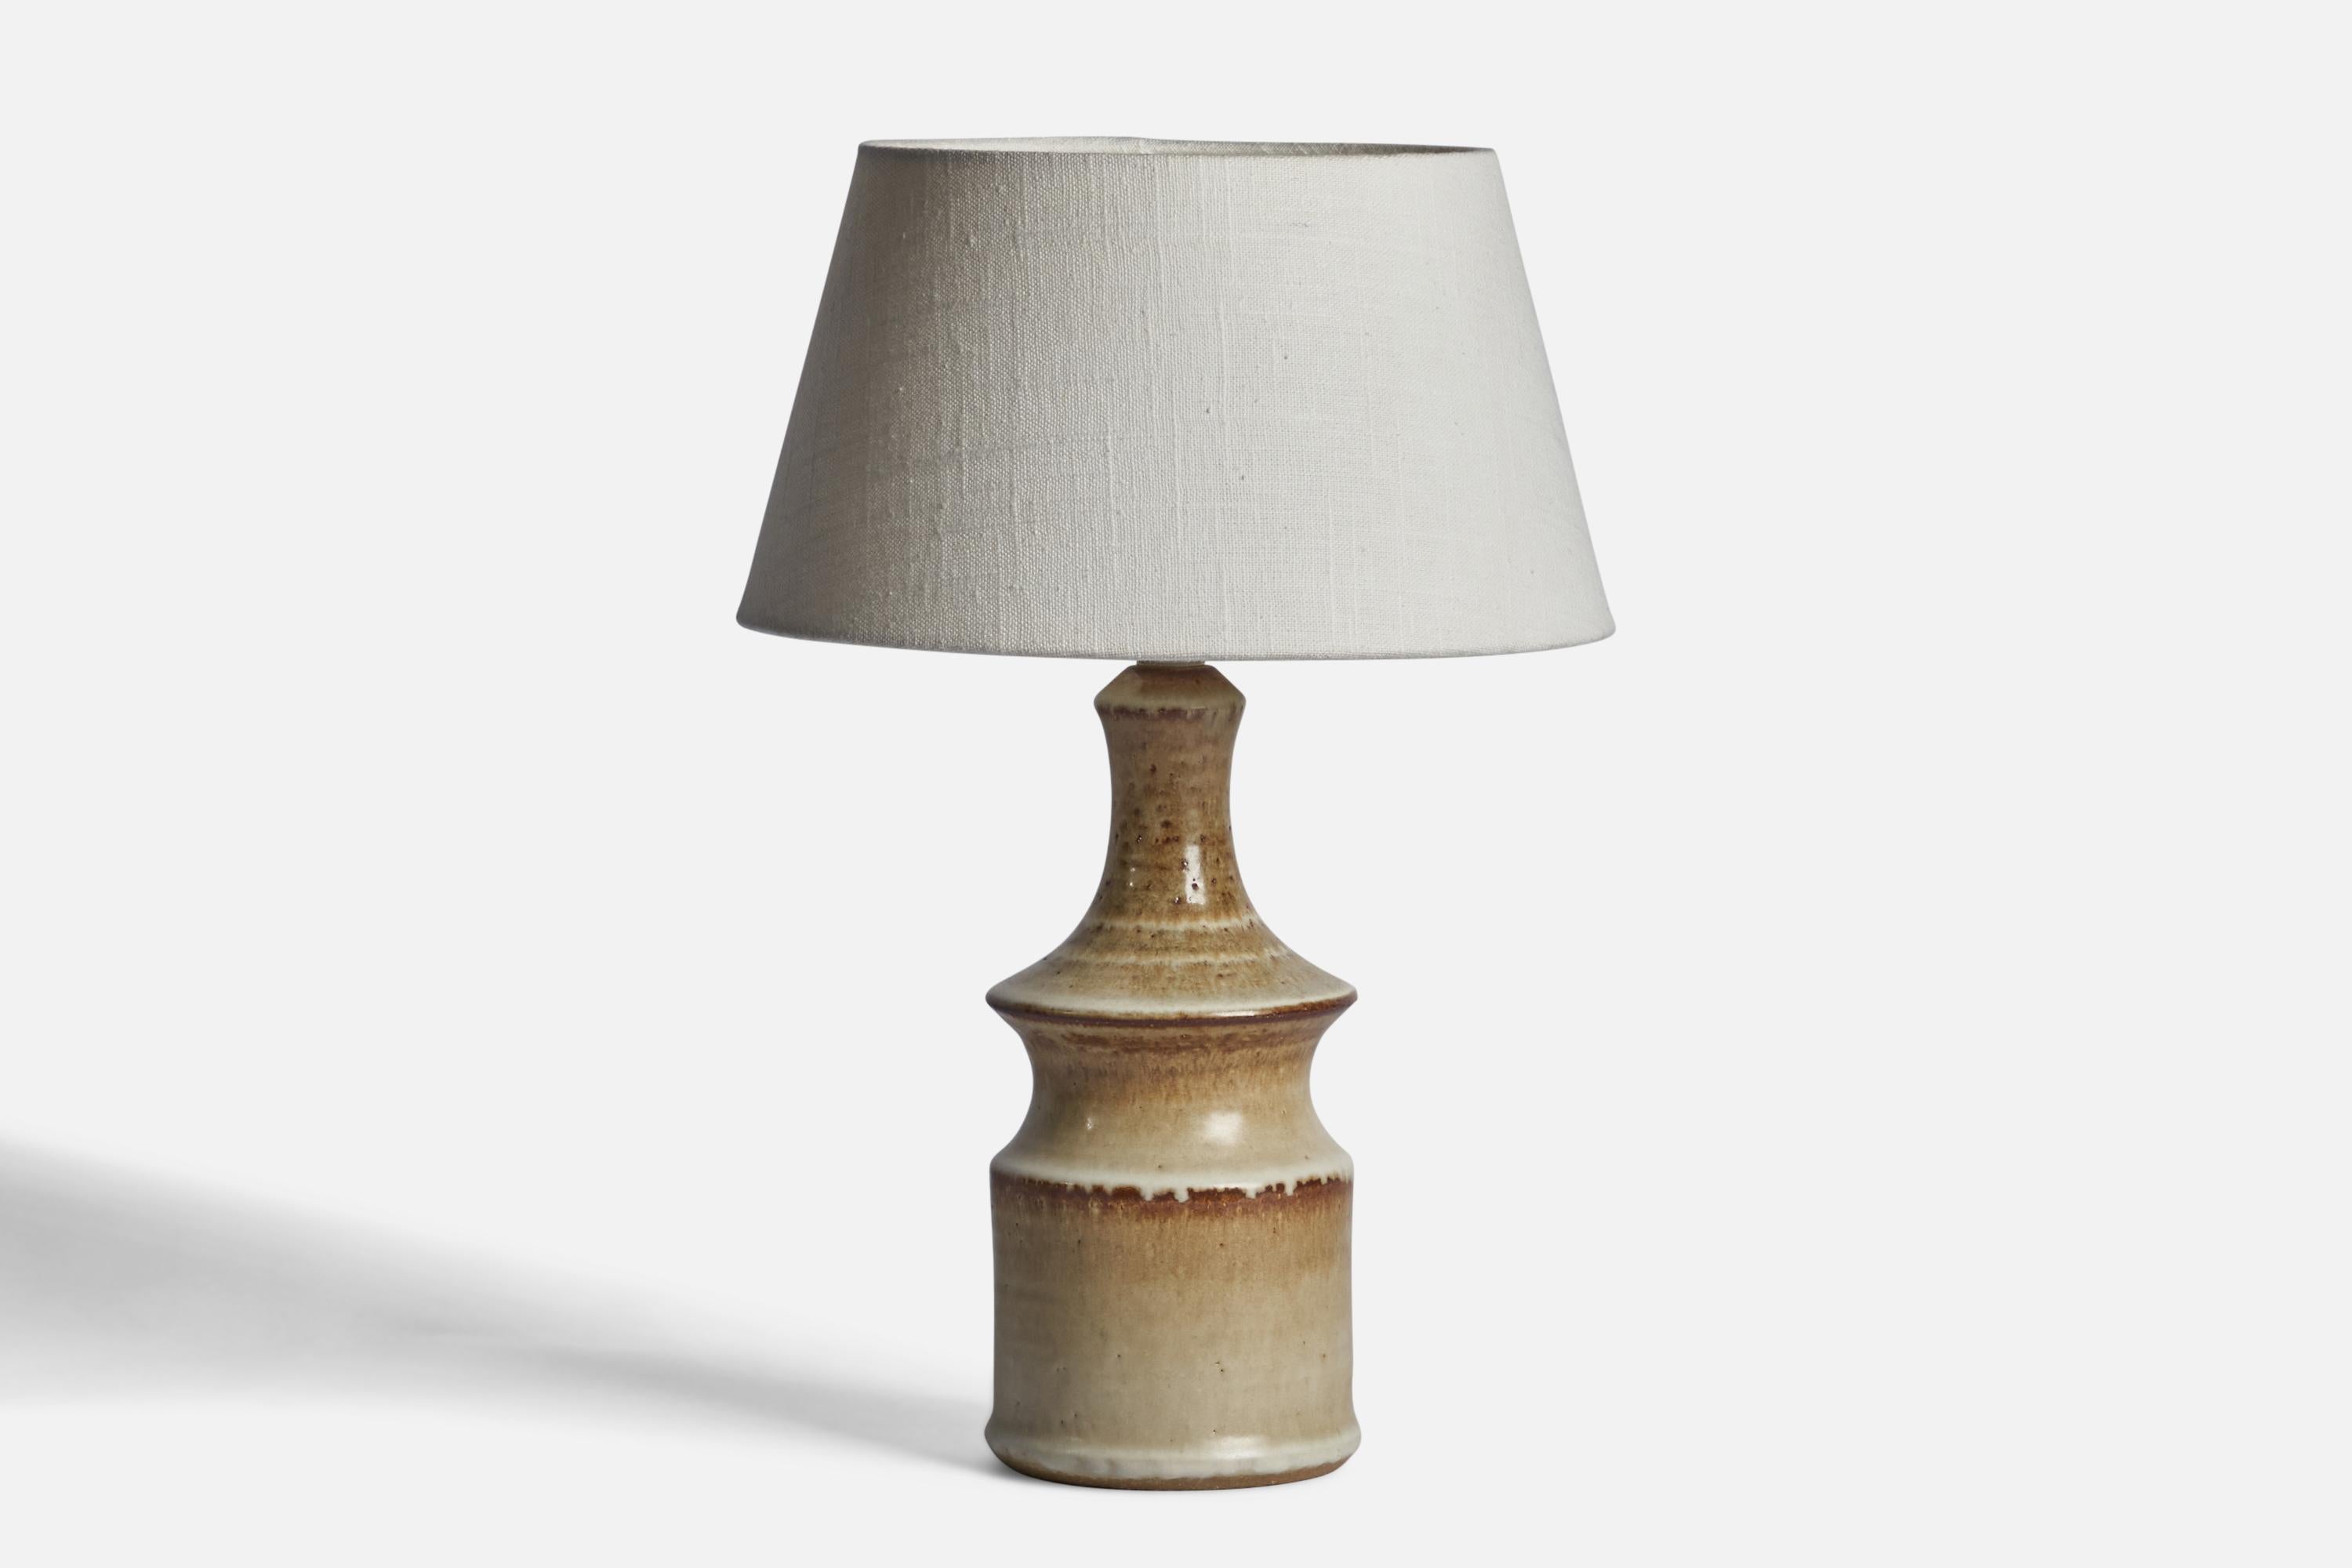 A stoneware table lamp designed by Joseph Simon and produced by Söholm, Denmark, 1960s.

Dimensions of Lamp (inches): 11.5” H x 4.35” Diameter
Dimensions of Shade (inches): 7” Top Diameter x 10” Bottom Diameter x 5.5” H 
Dimensions of Lamp with